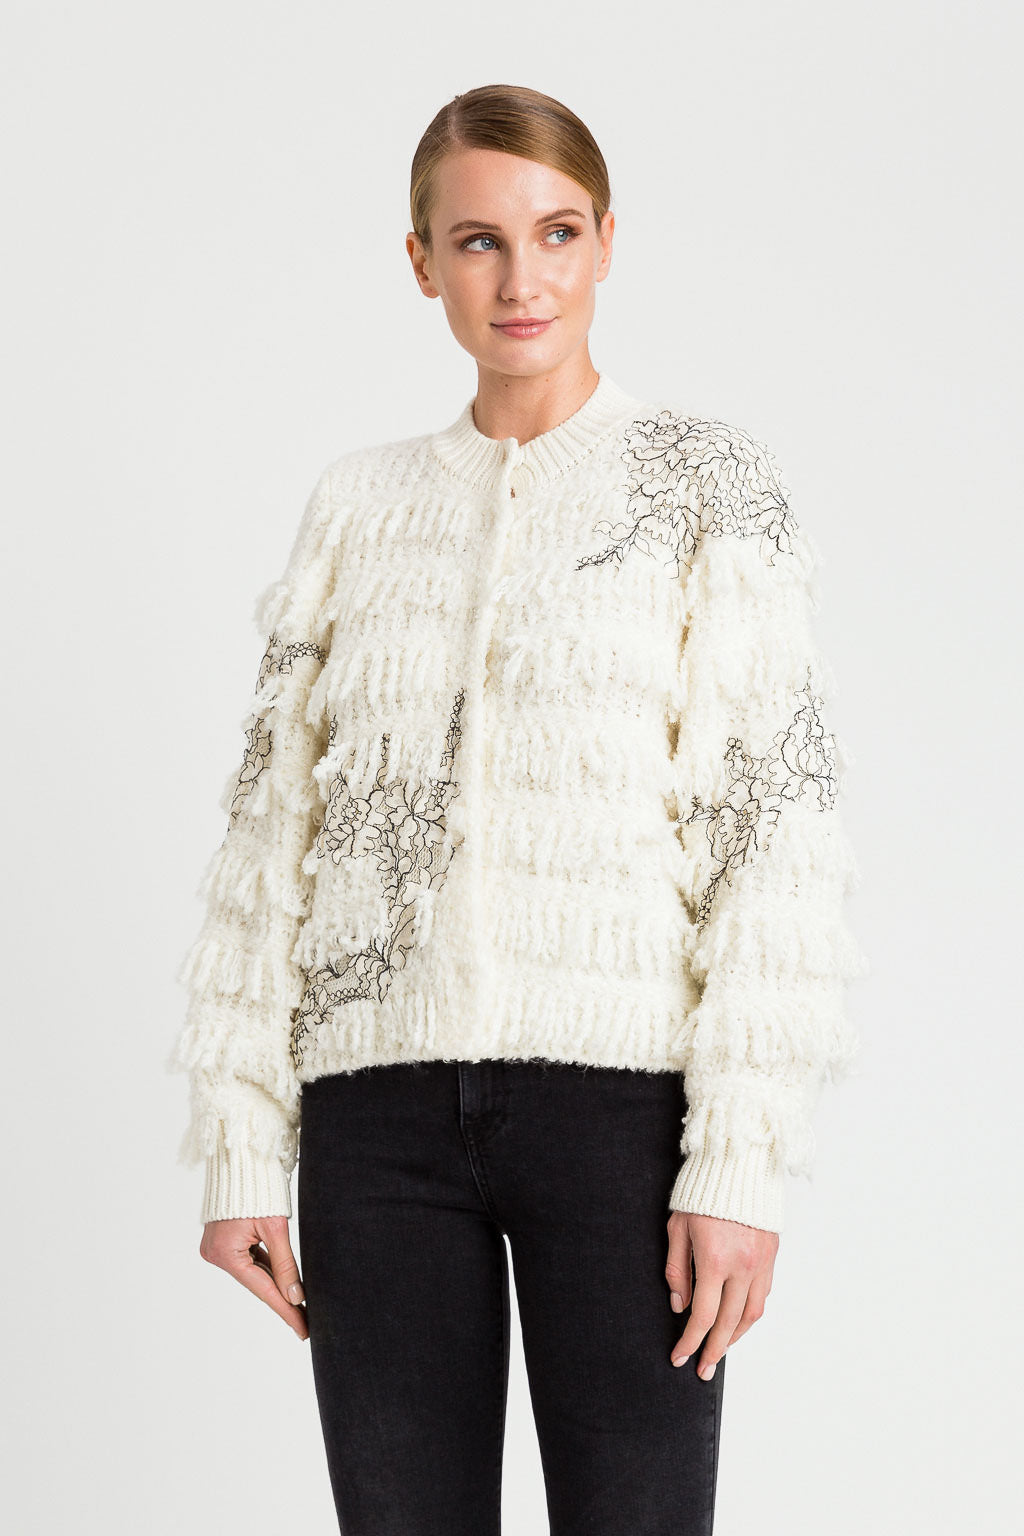 Twinset Jacket in White Knit